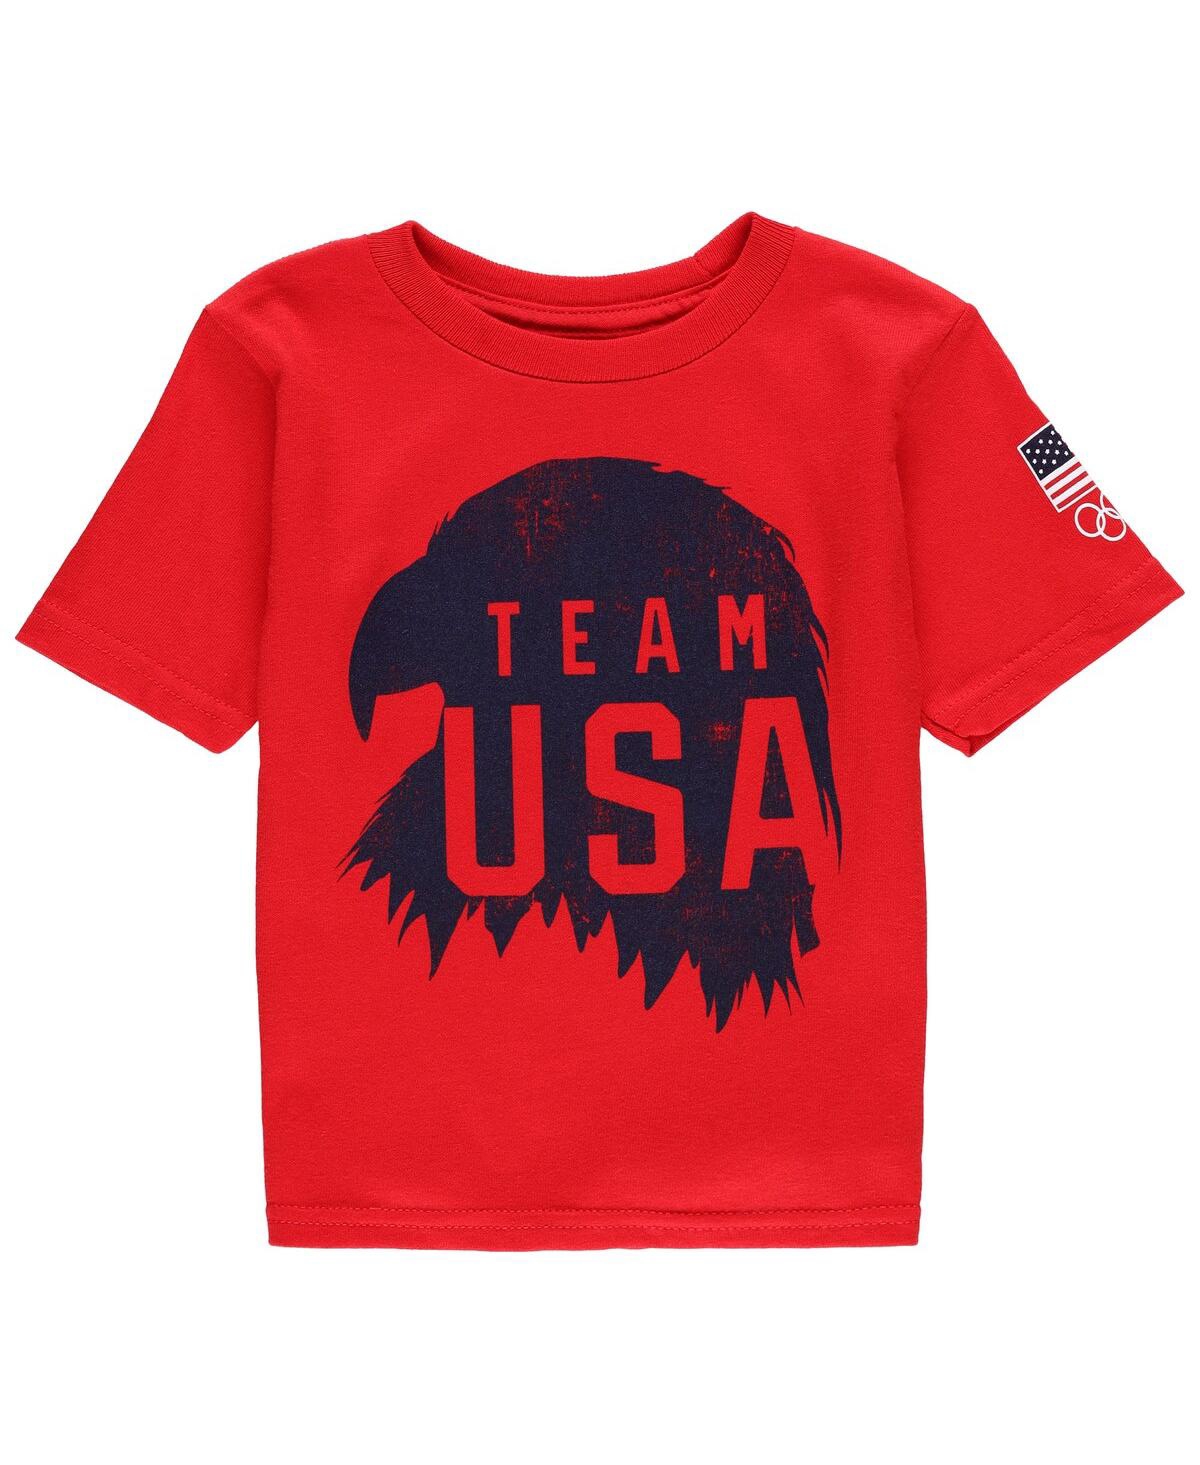 Outerstuff Babies' Toddler Boys And Girls Red Distressed Team Usa T-shirt